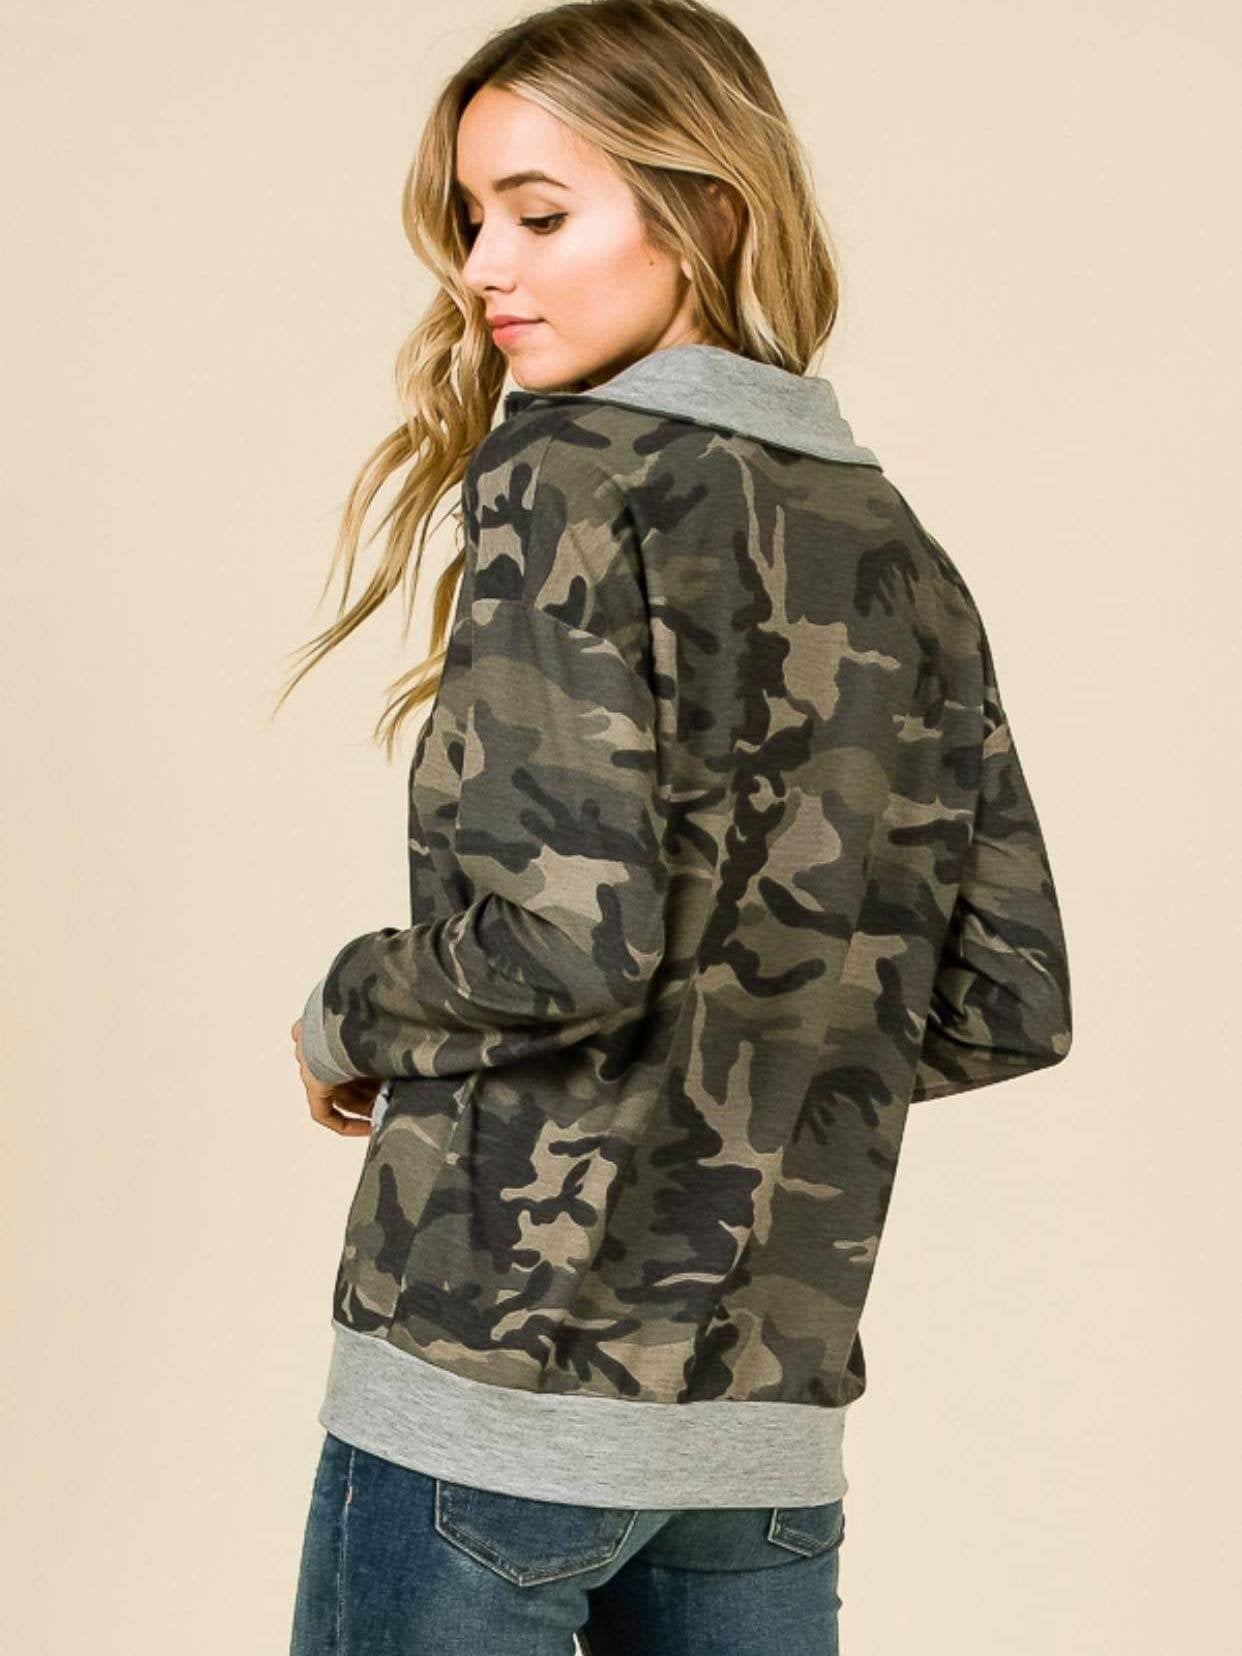 Monogrammed Camo 1/4 Zip Pullover - Embroidered Women's Camouflage Quarter Zip Up Sweatshirt, Personalized Hunting Pullovers, Monograms